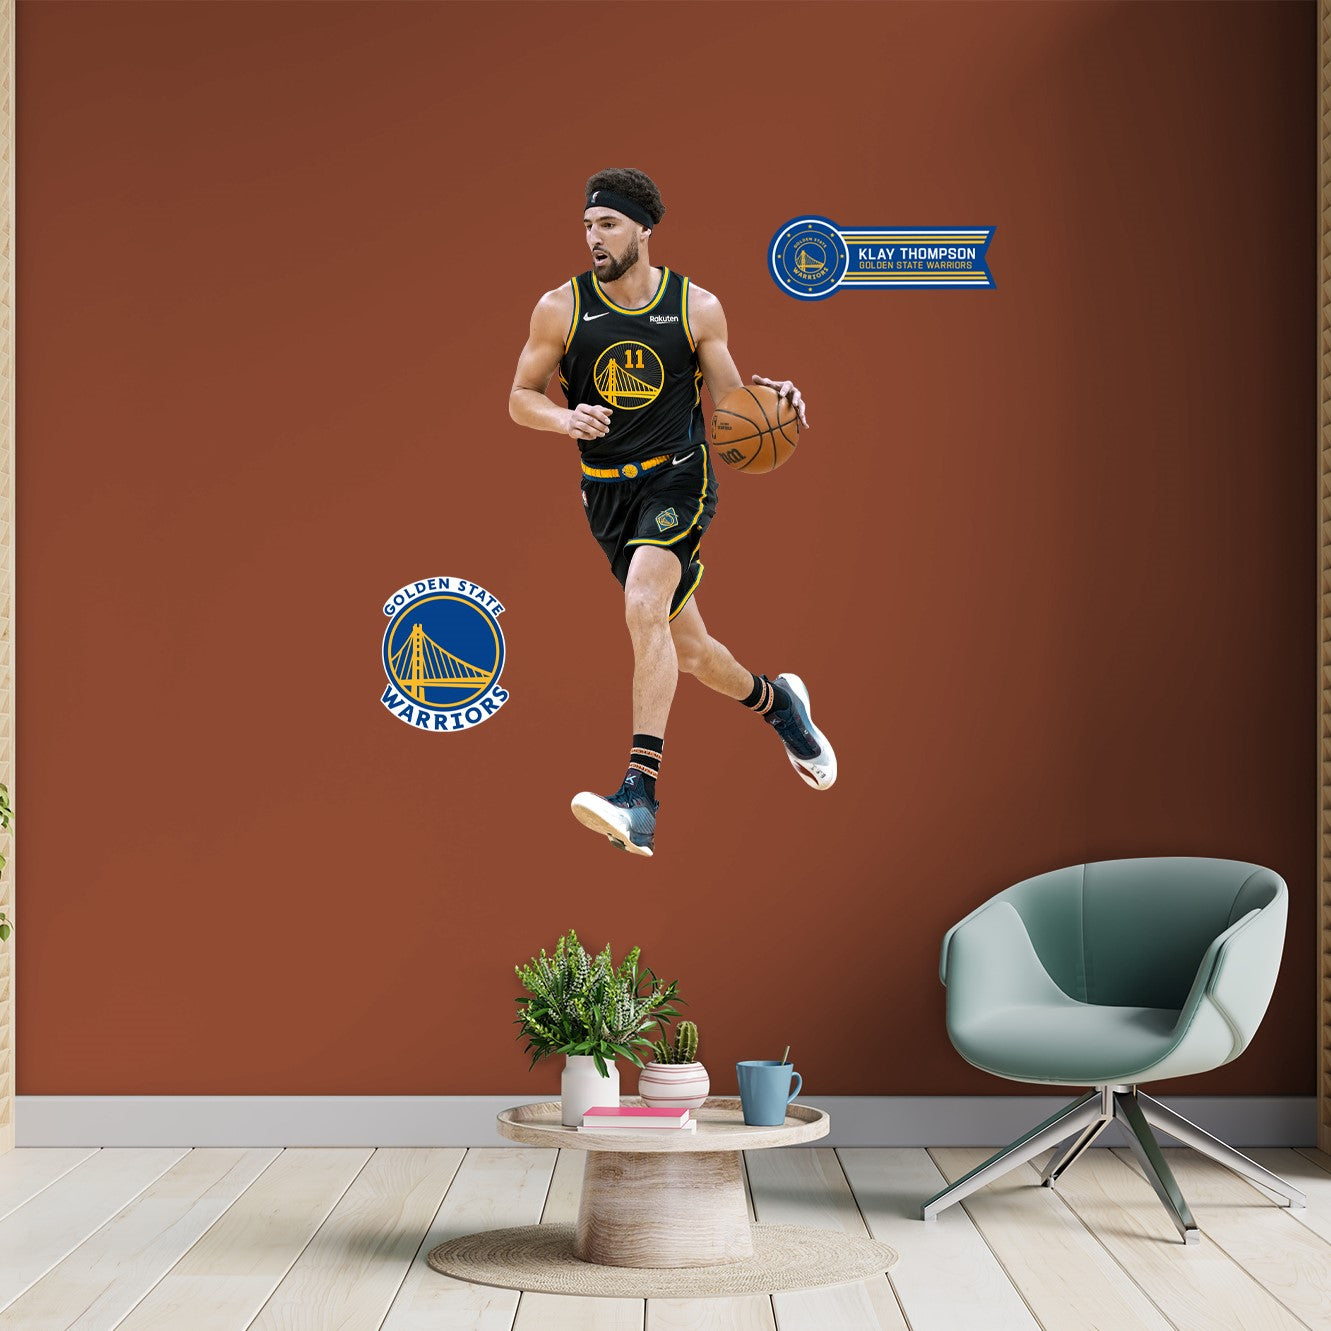 Golden State Warriors: Klay Thompson City Jersey - Officially Licensed NBA Removable Adhesive Decal